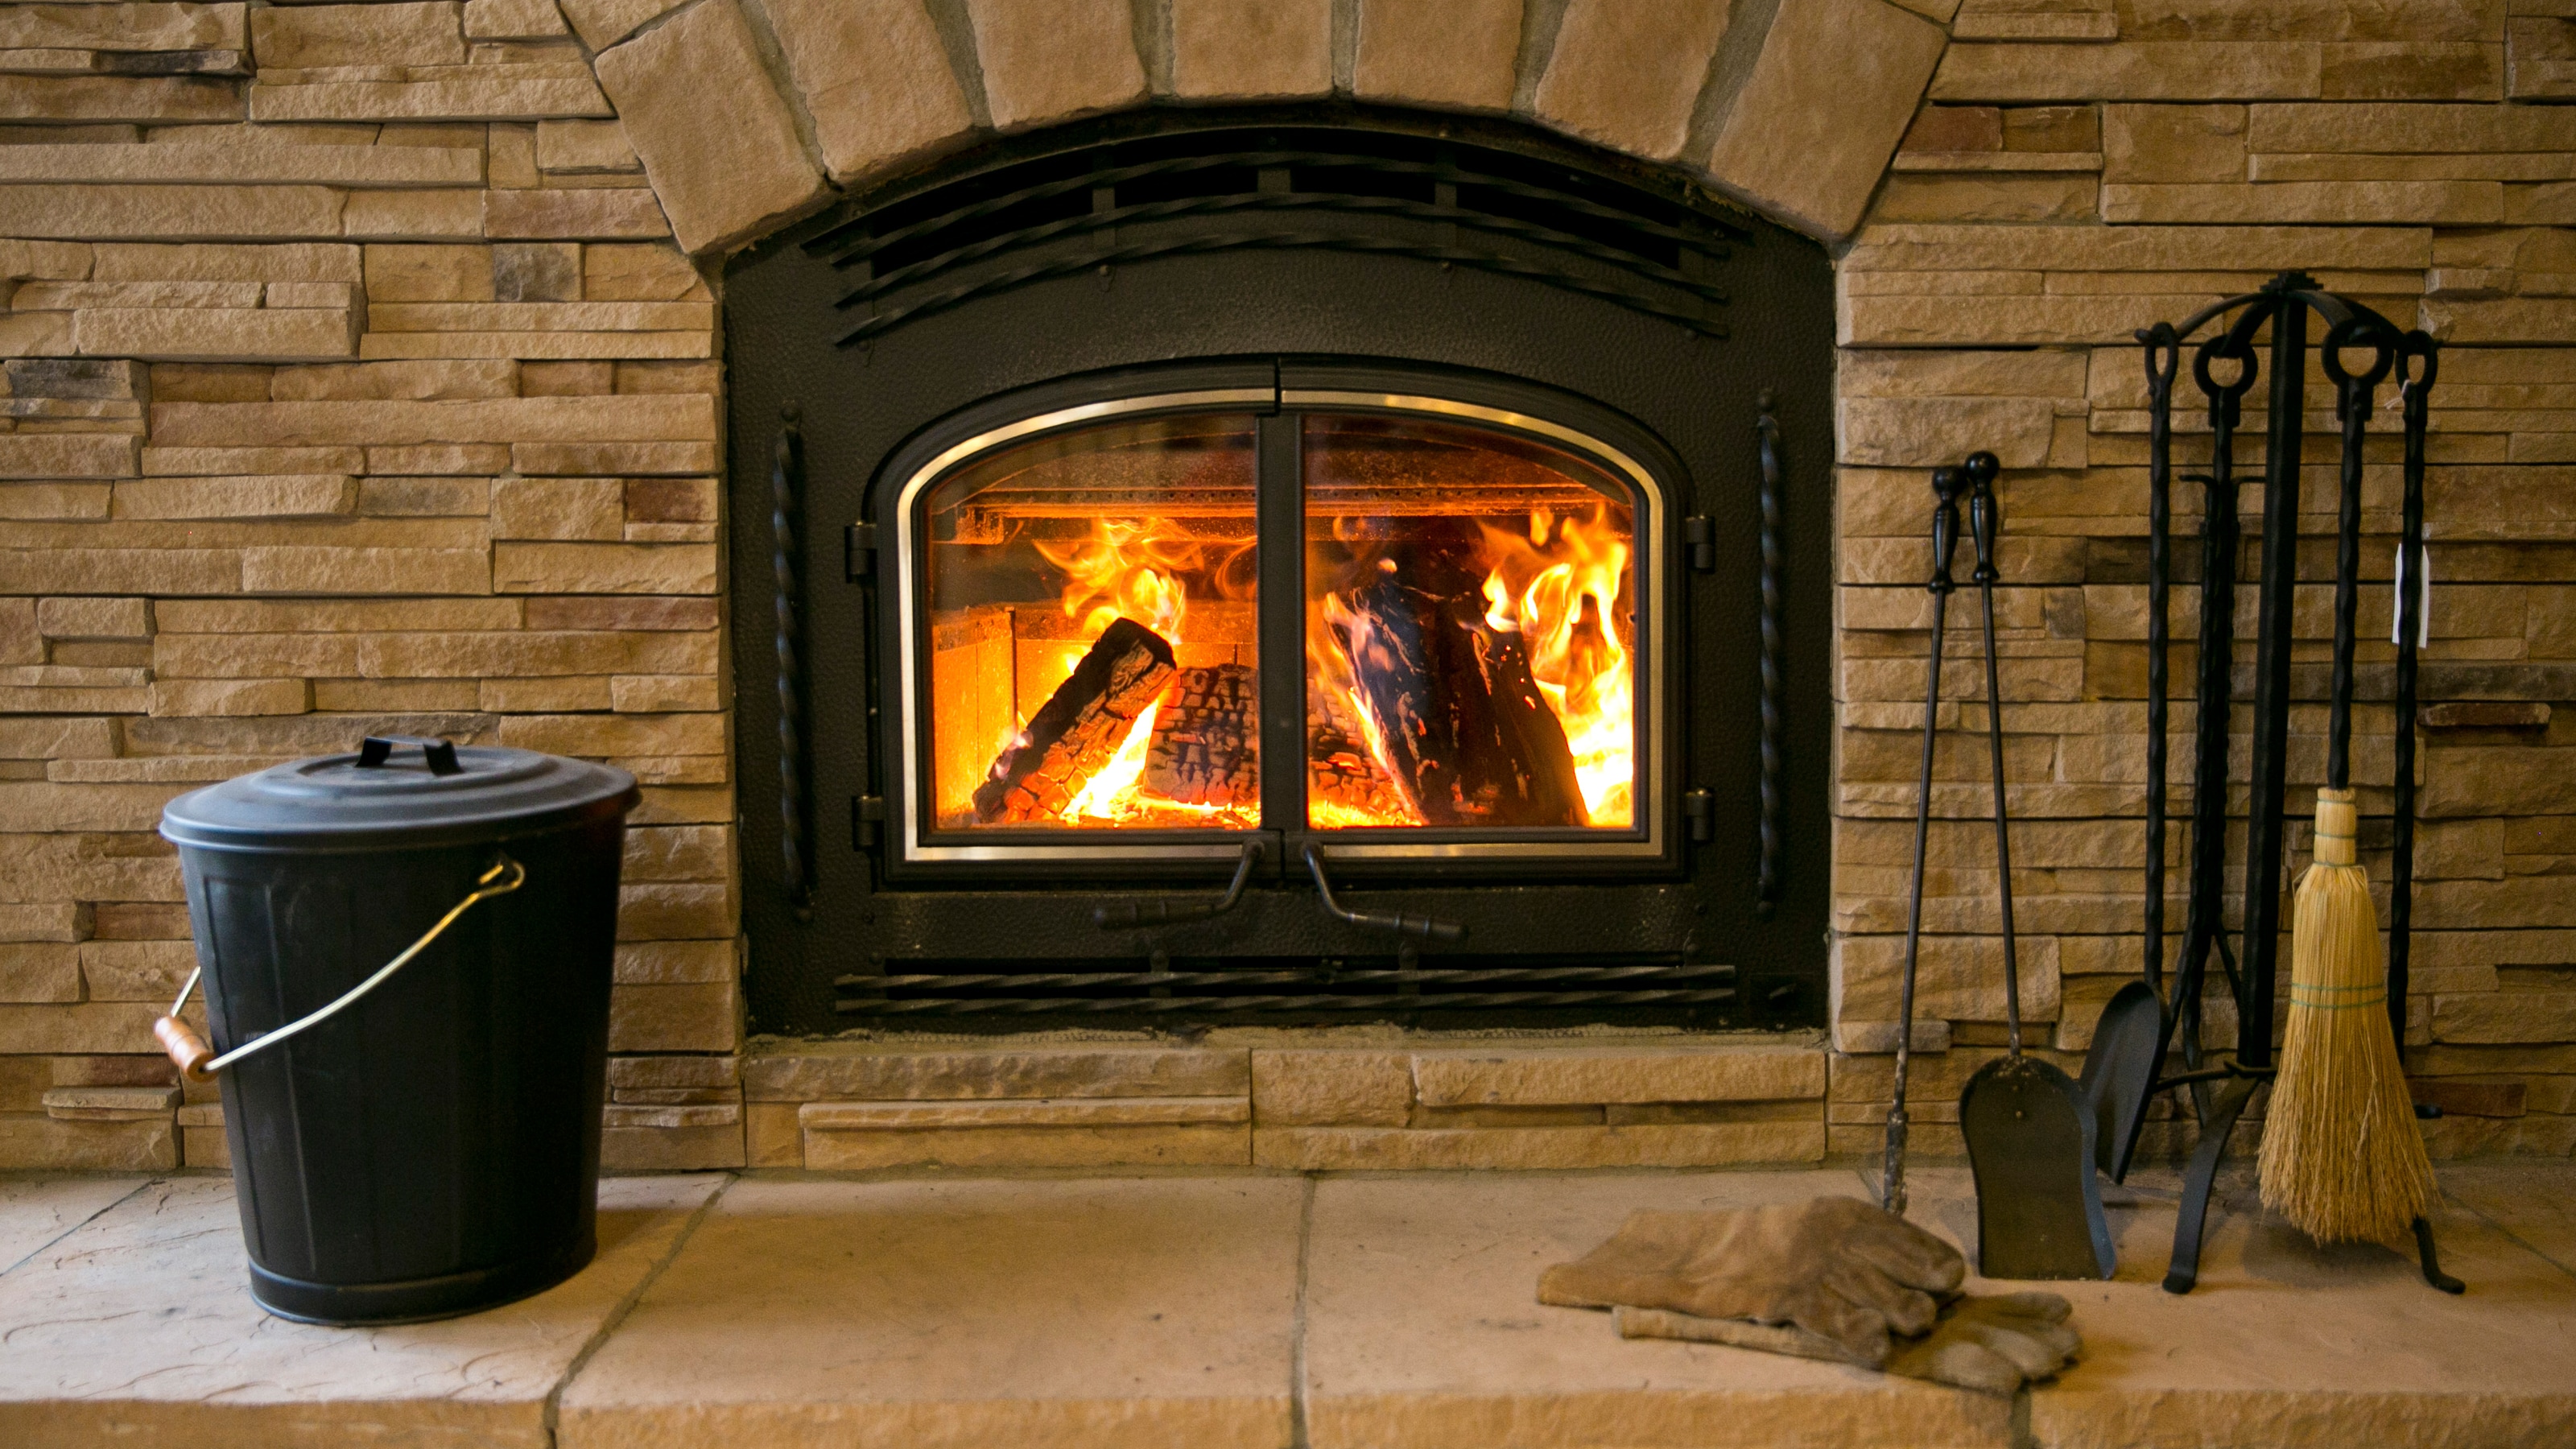 House Smells Like Smoke From Fireplace Lovely How to Convert A Gas Fireplace to Wood Burning